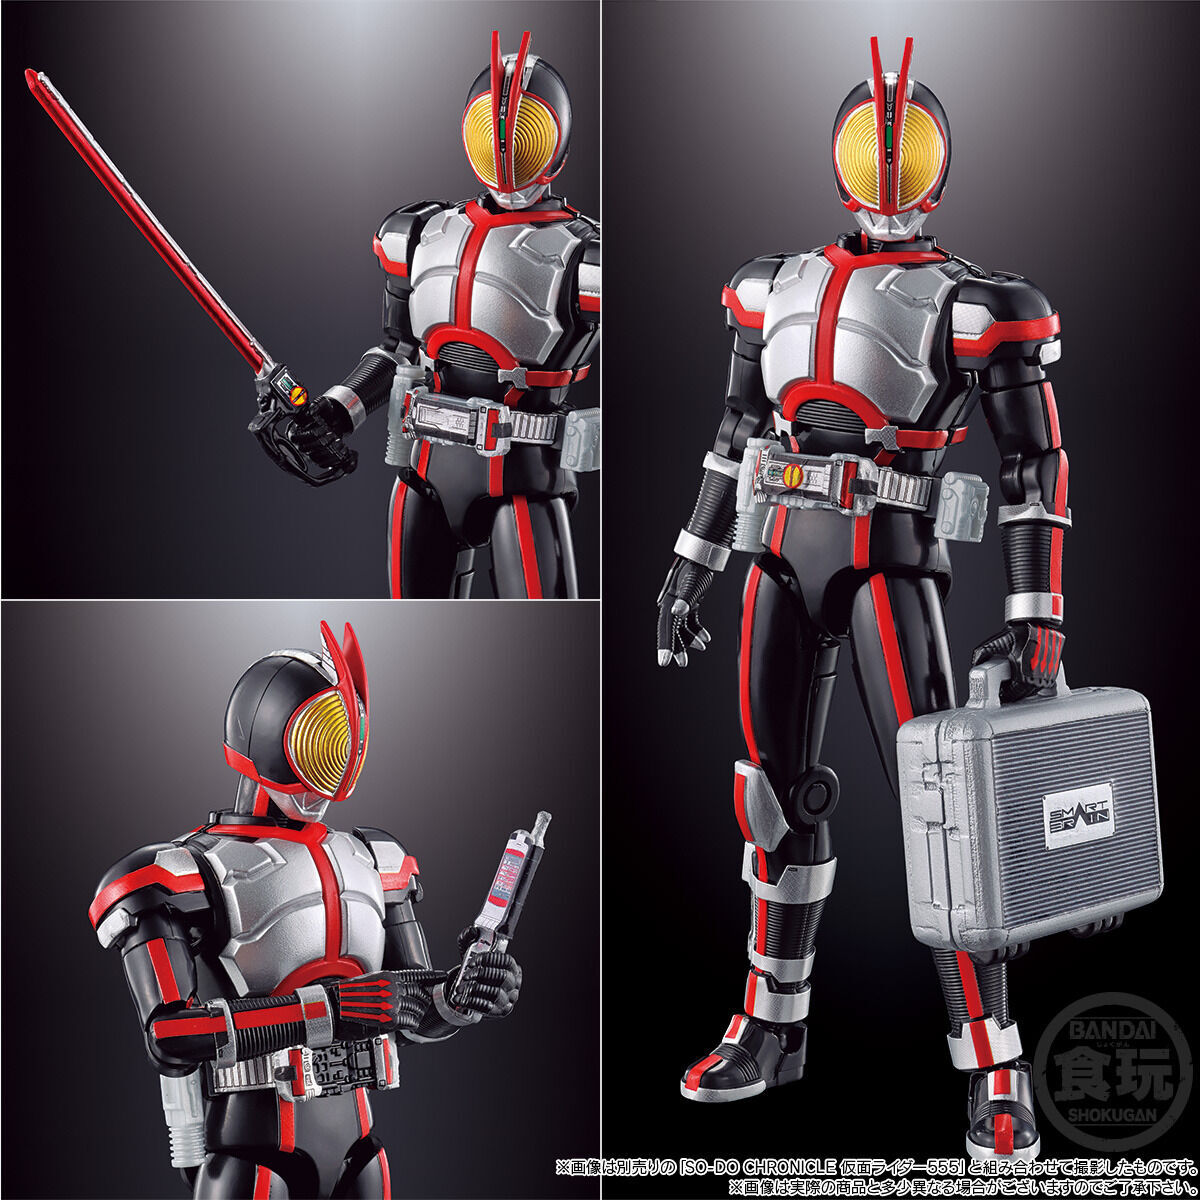 SO-DO CHRONICLE 仮面ライダー555セット - ロボット